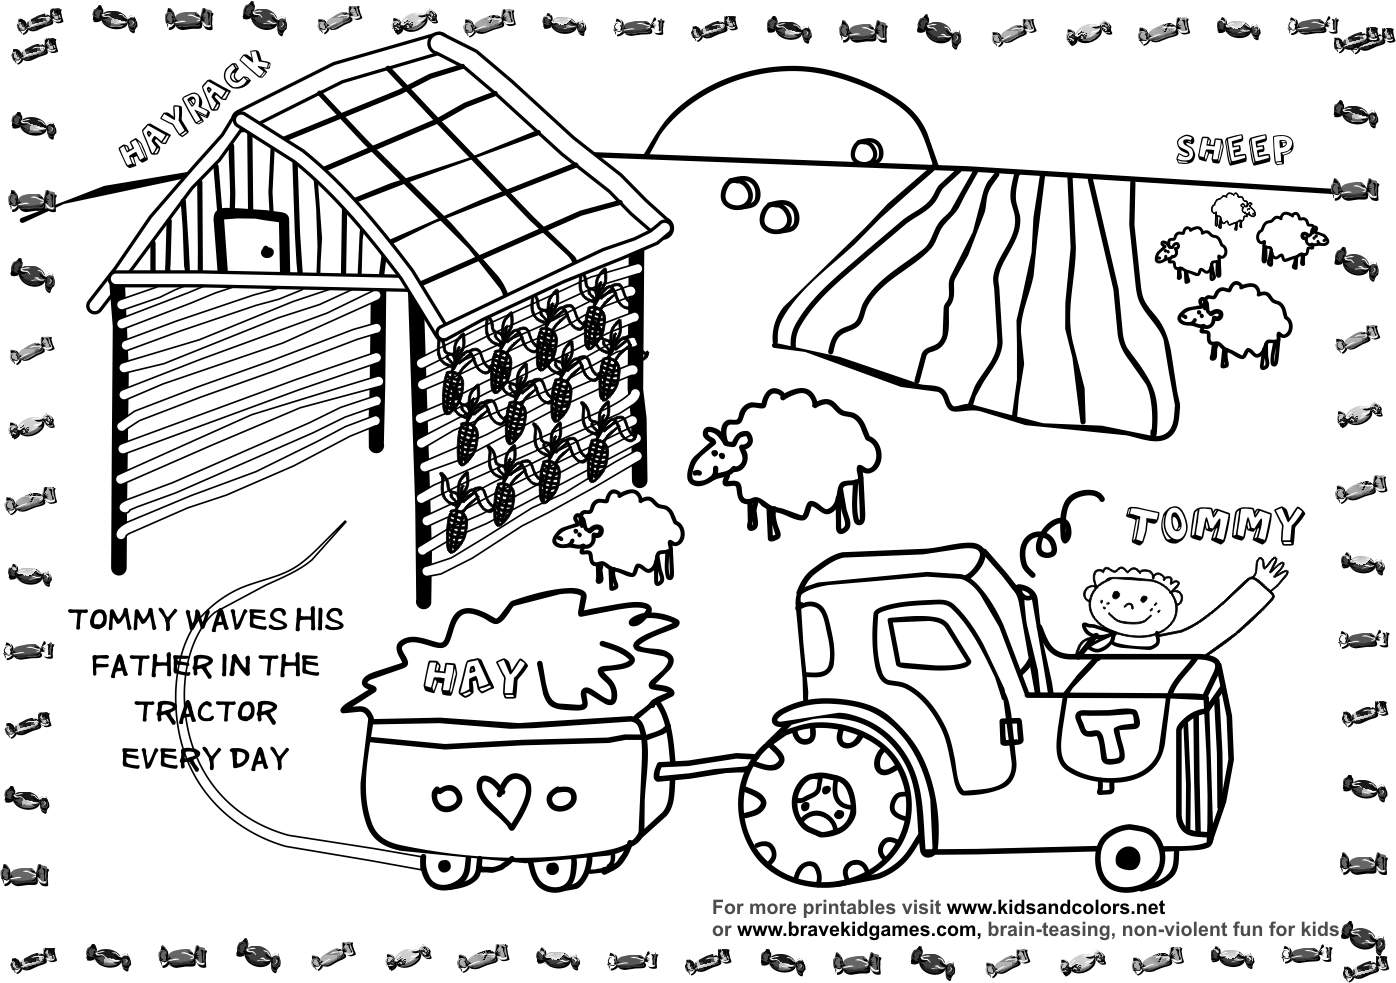 19 Free Pictures for: Farm Coloring Pages. Temoon.us